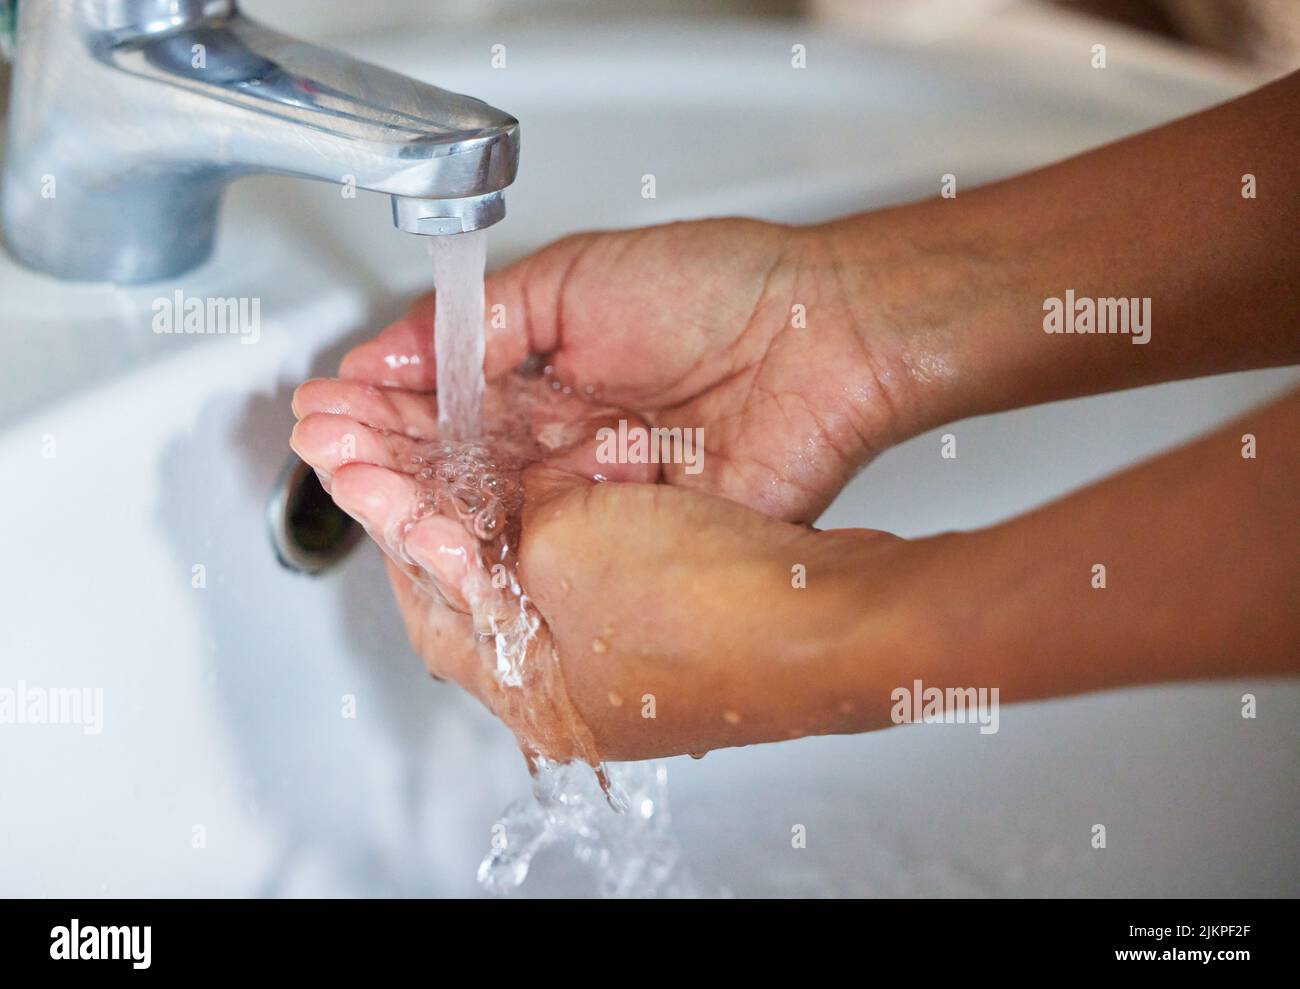 Water, the worlds first and foremost medicine. an unrecognizable male washing his hands in a hand basin at home. Stock Photo